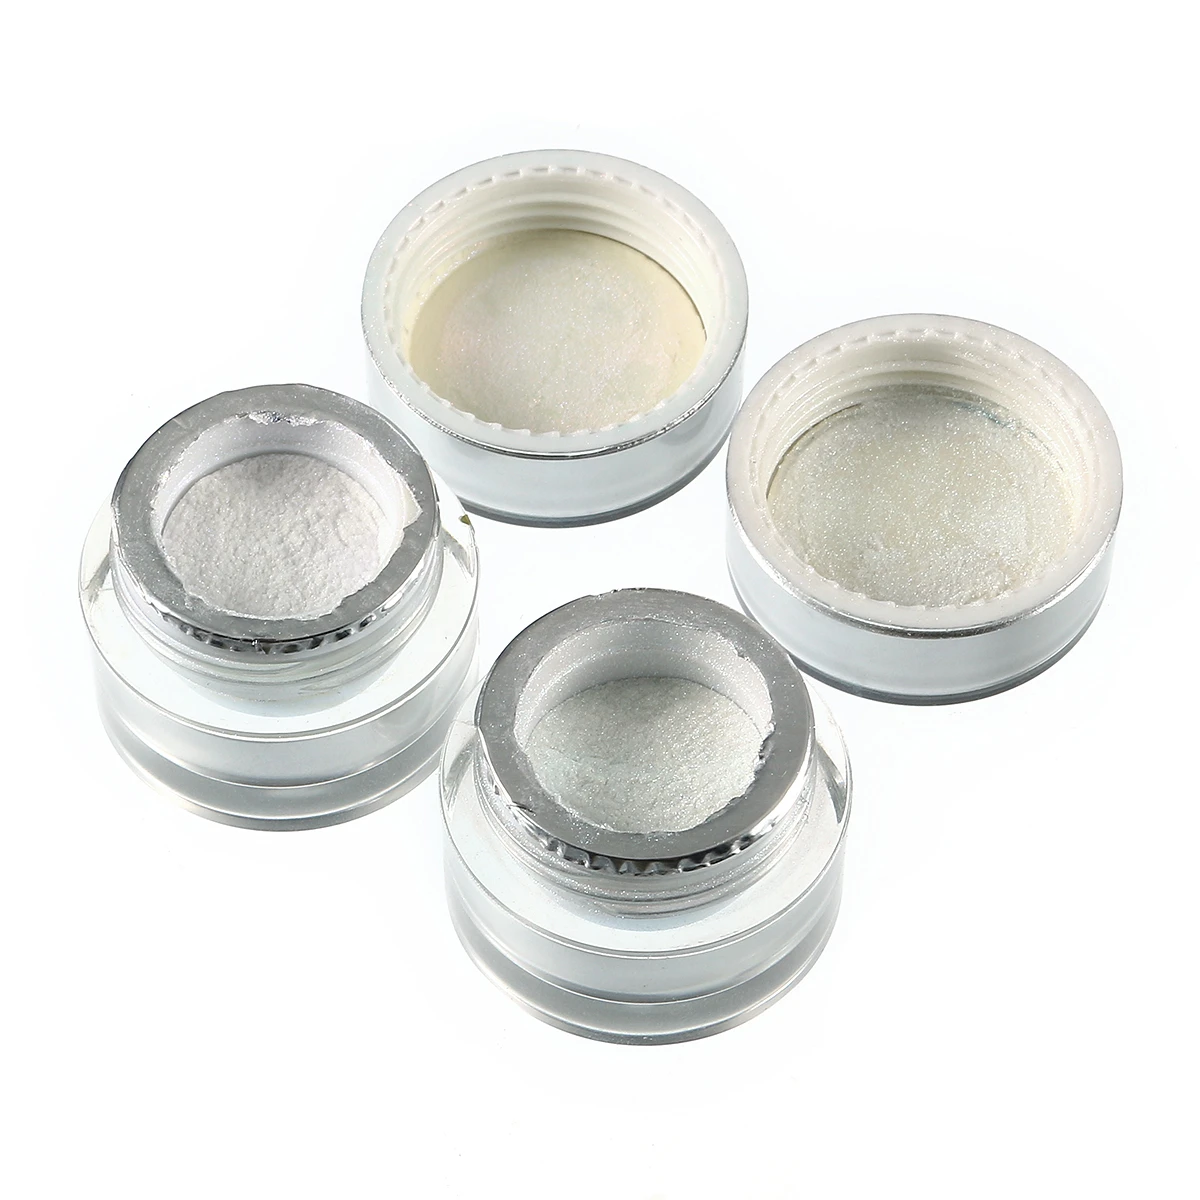 6 Colors Magic Mirror Chrome Pearl Shell Luster Powder Dust Decorations Glitter Pigment